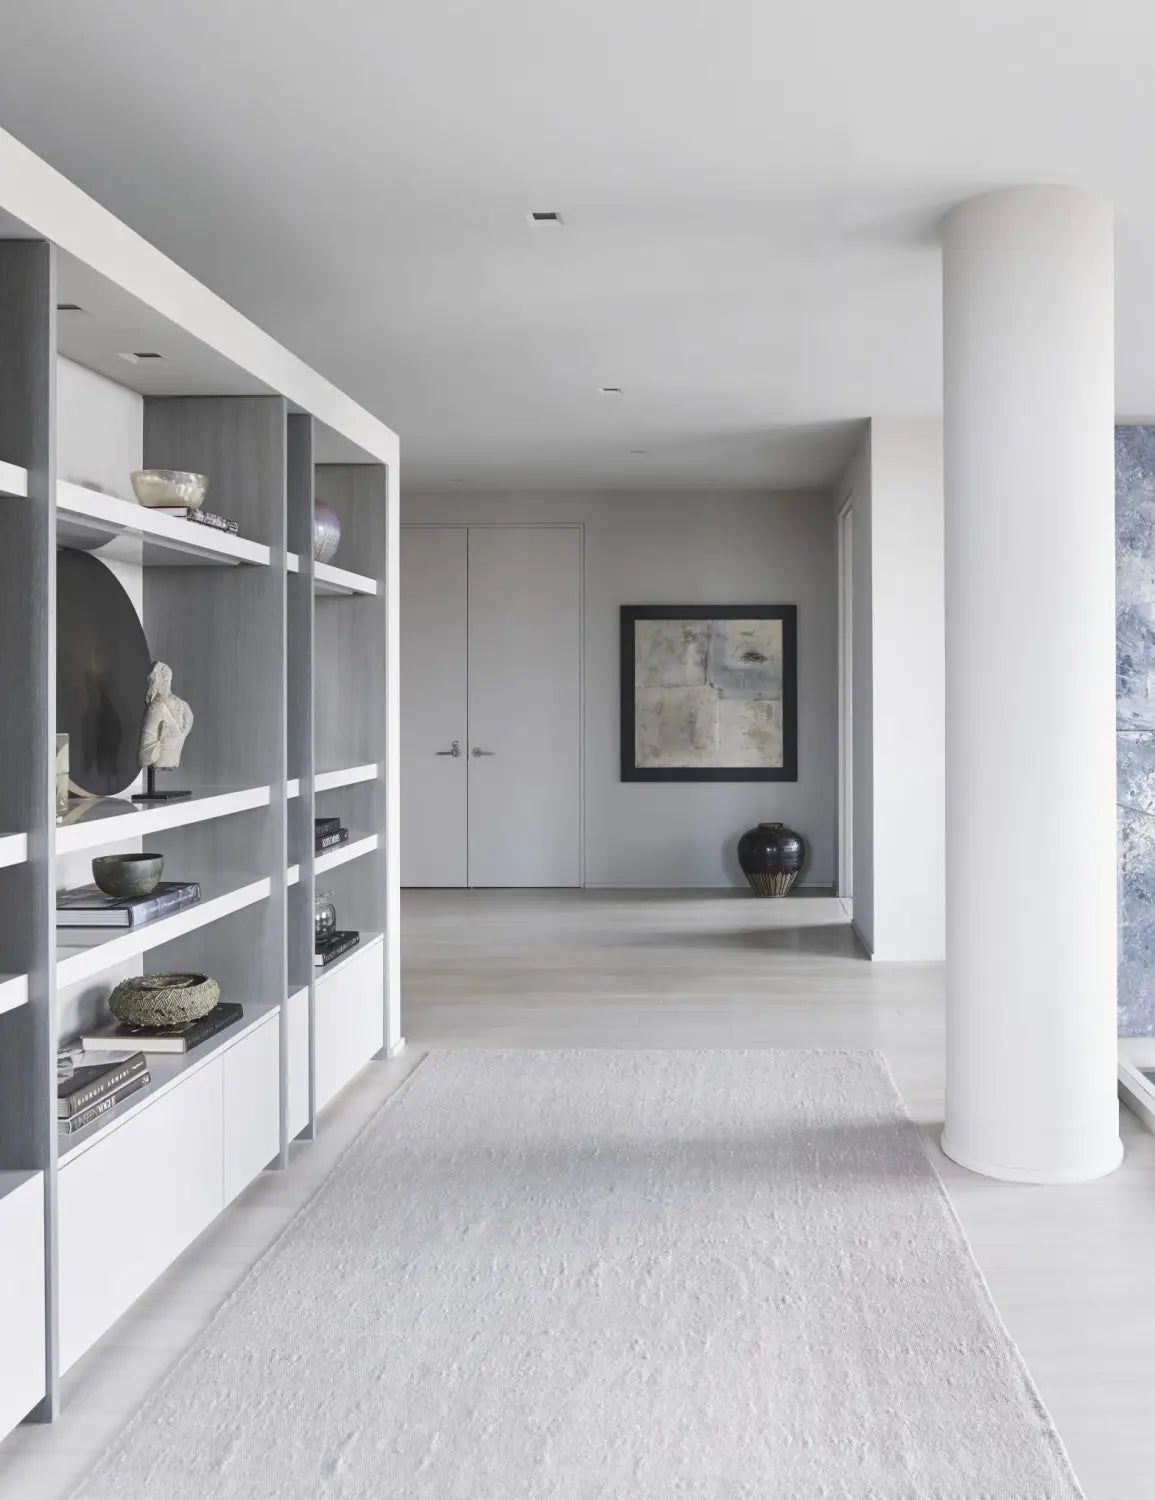 Mar Silver Has Crafted Serene, Sensorial Interiors For A 